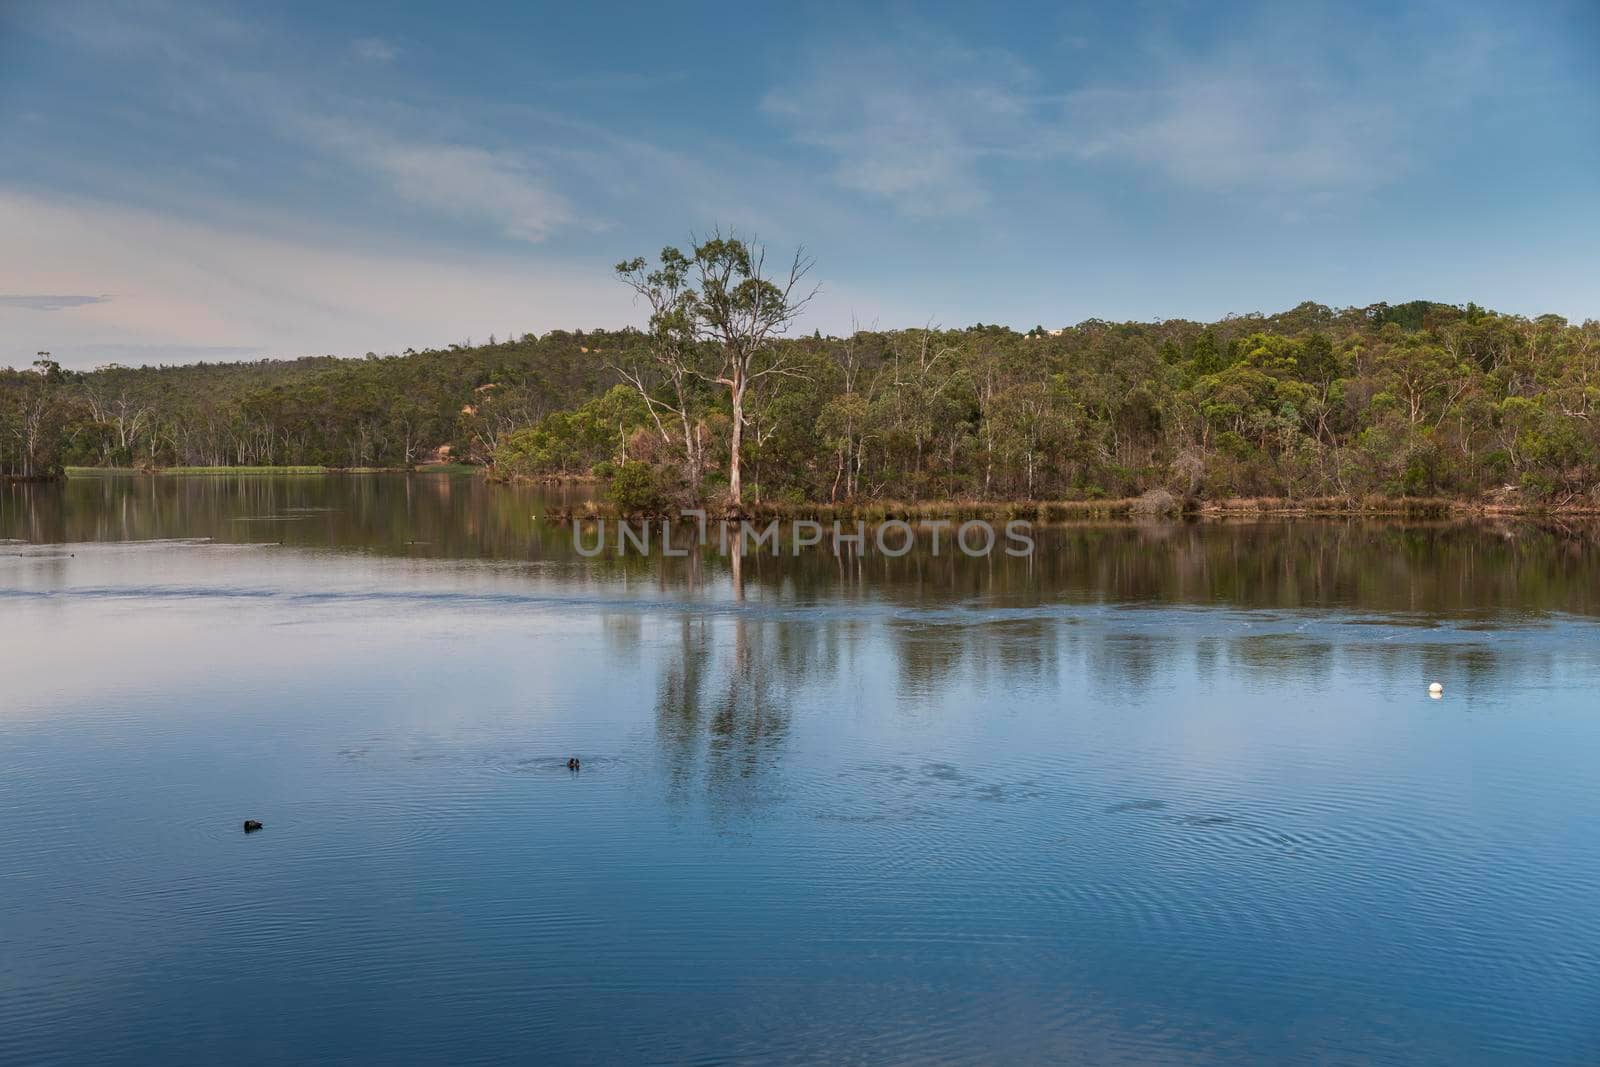 The Barossa Reservoir water supply with trees in the background and ducks in the foreground by WittkePhotos